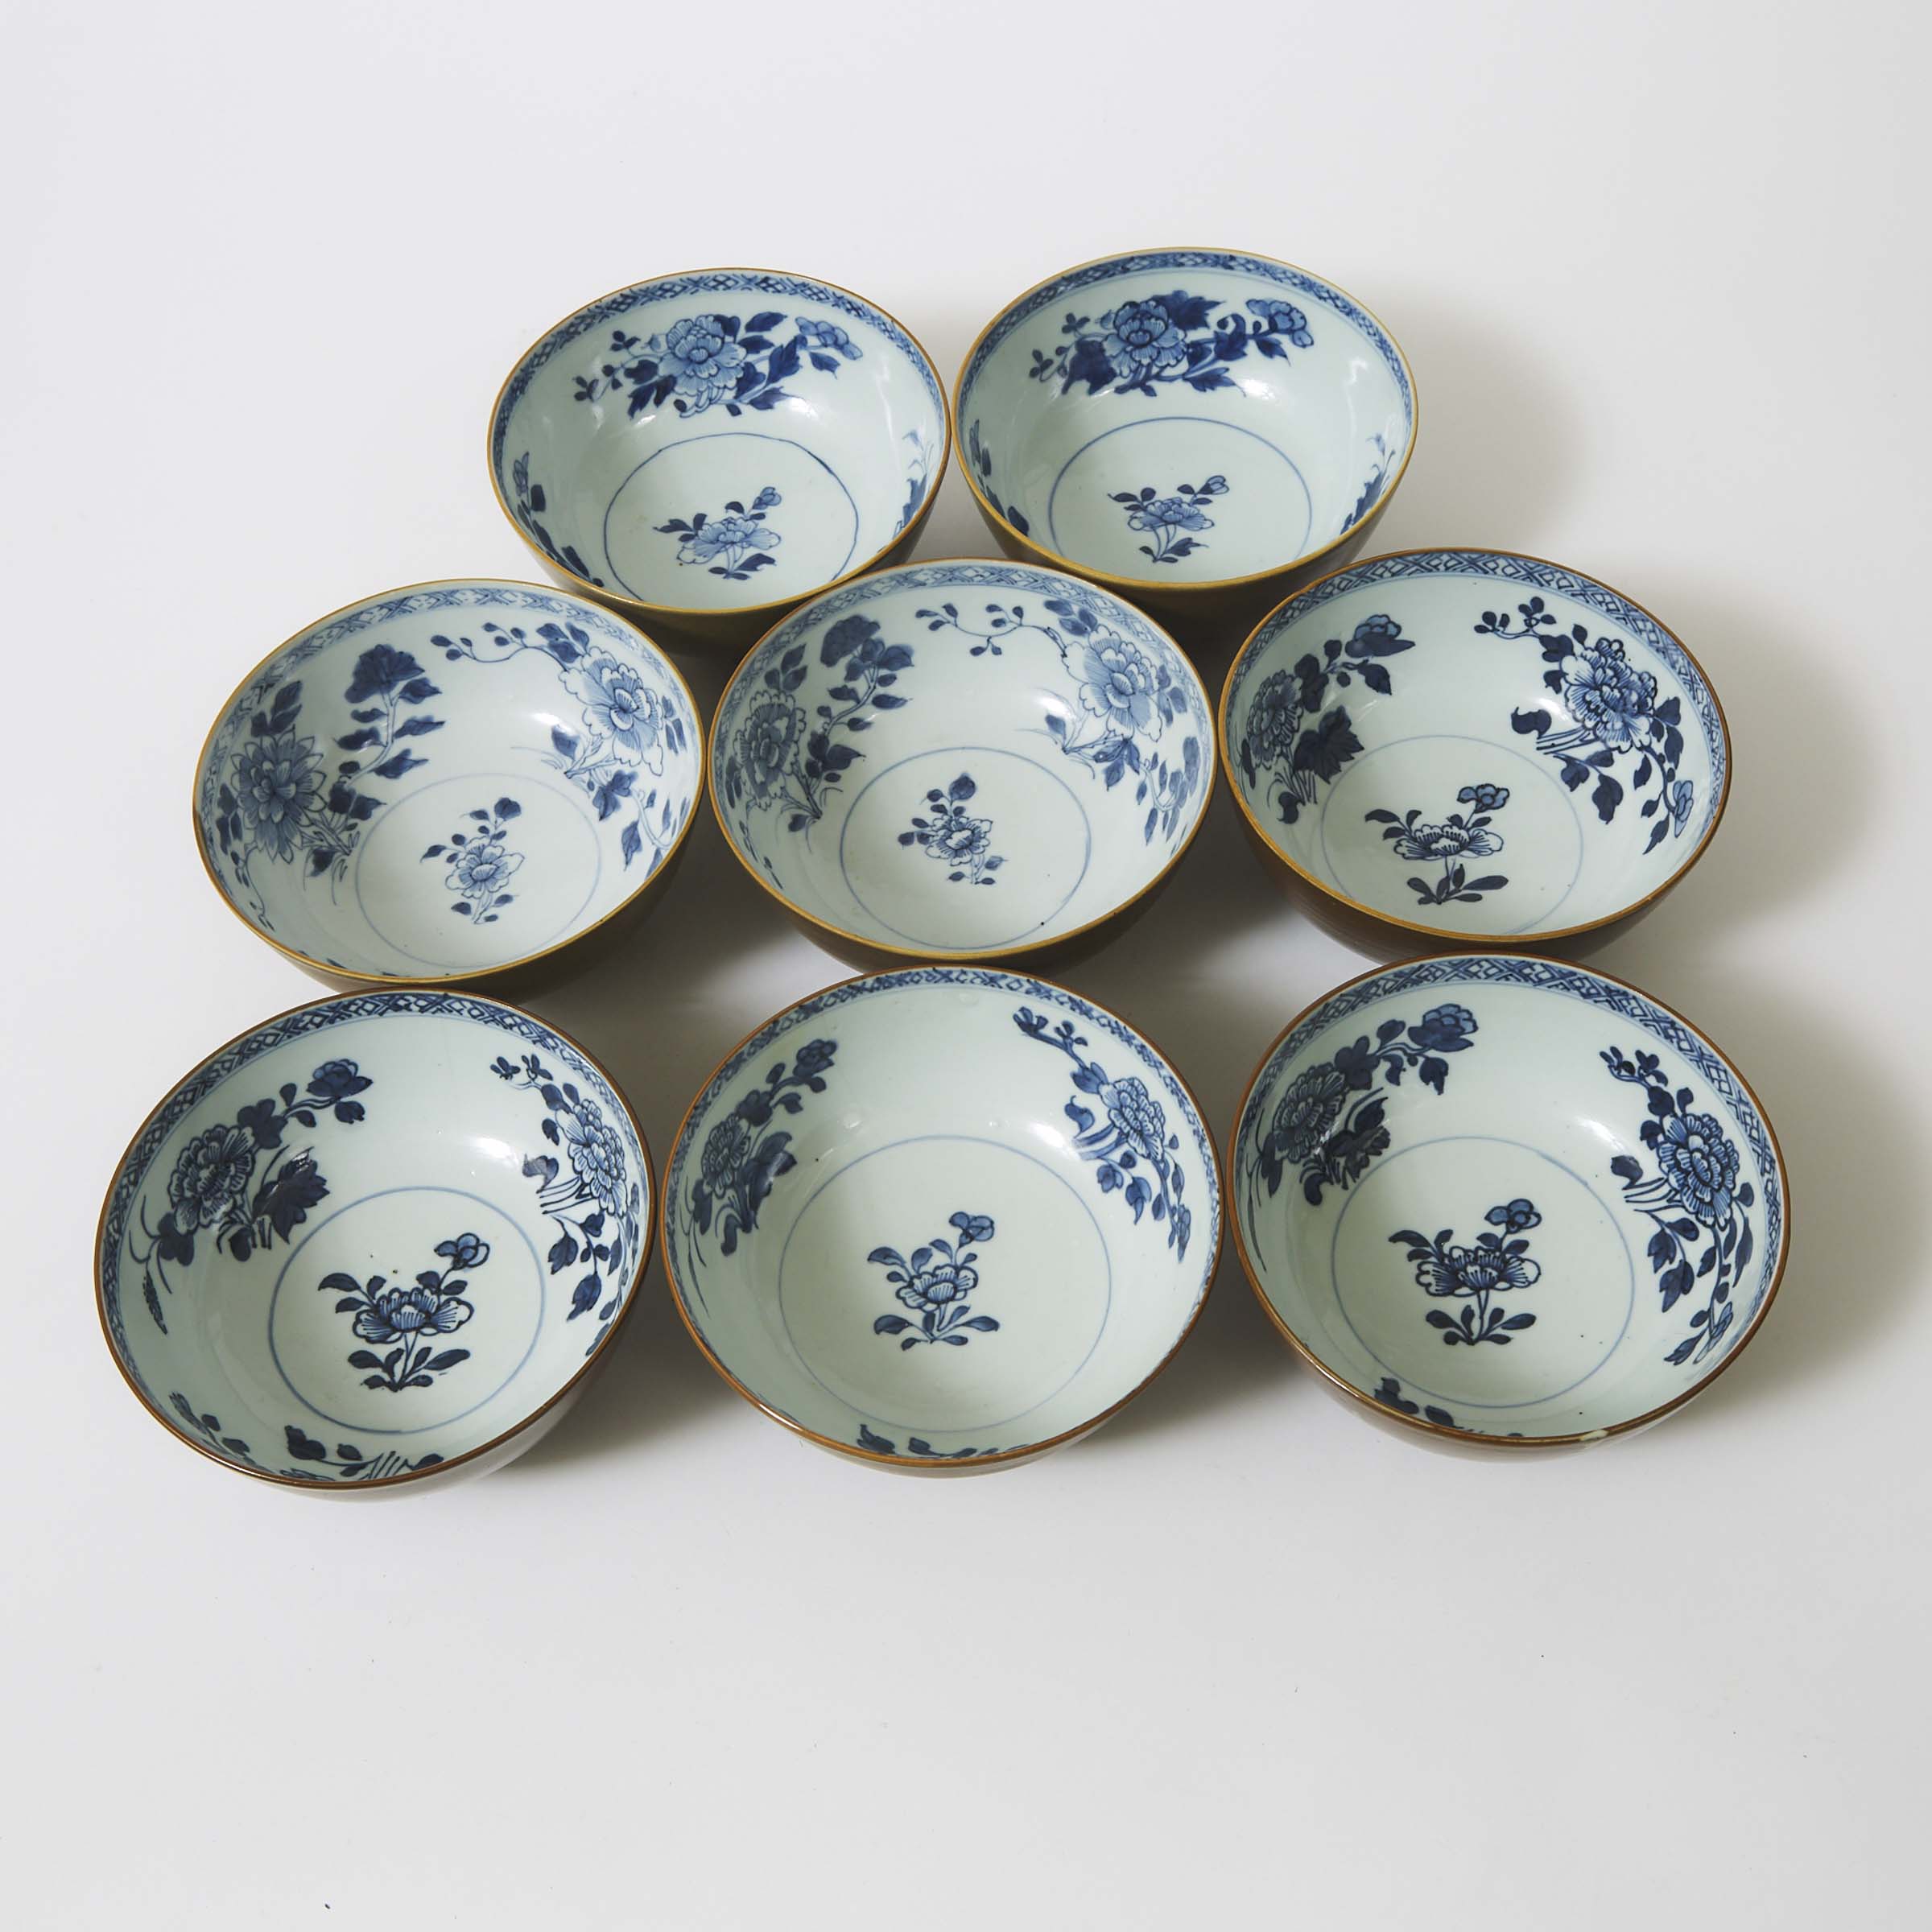 A Set of Eight 'Batavian' Floral Small Bowls from the Nanking Cargo, Qianlong Period, Circa 1750